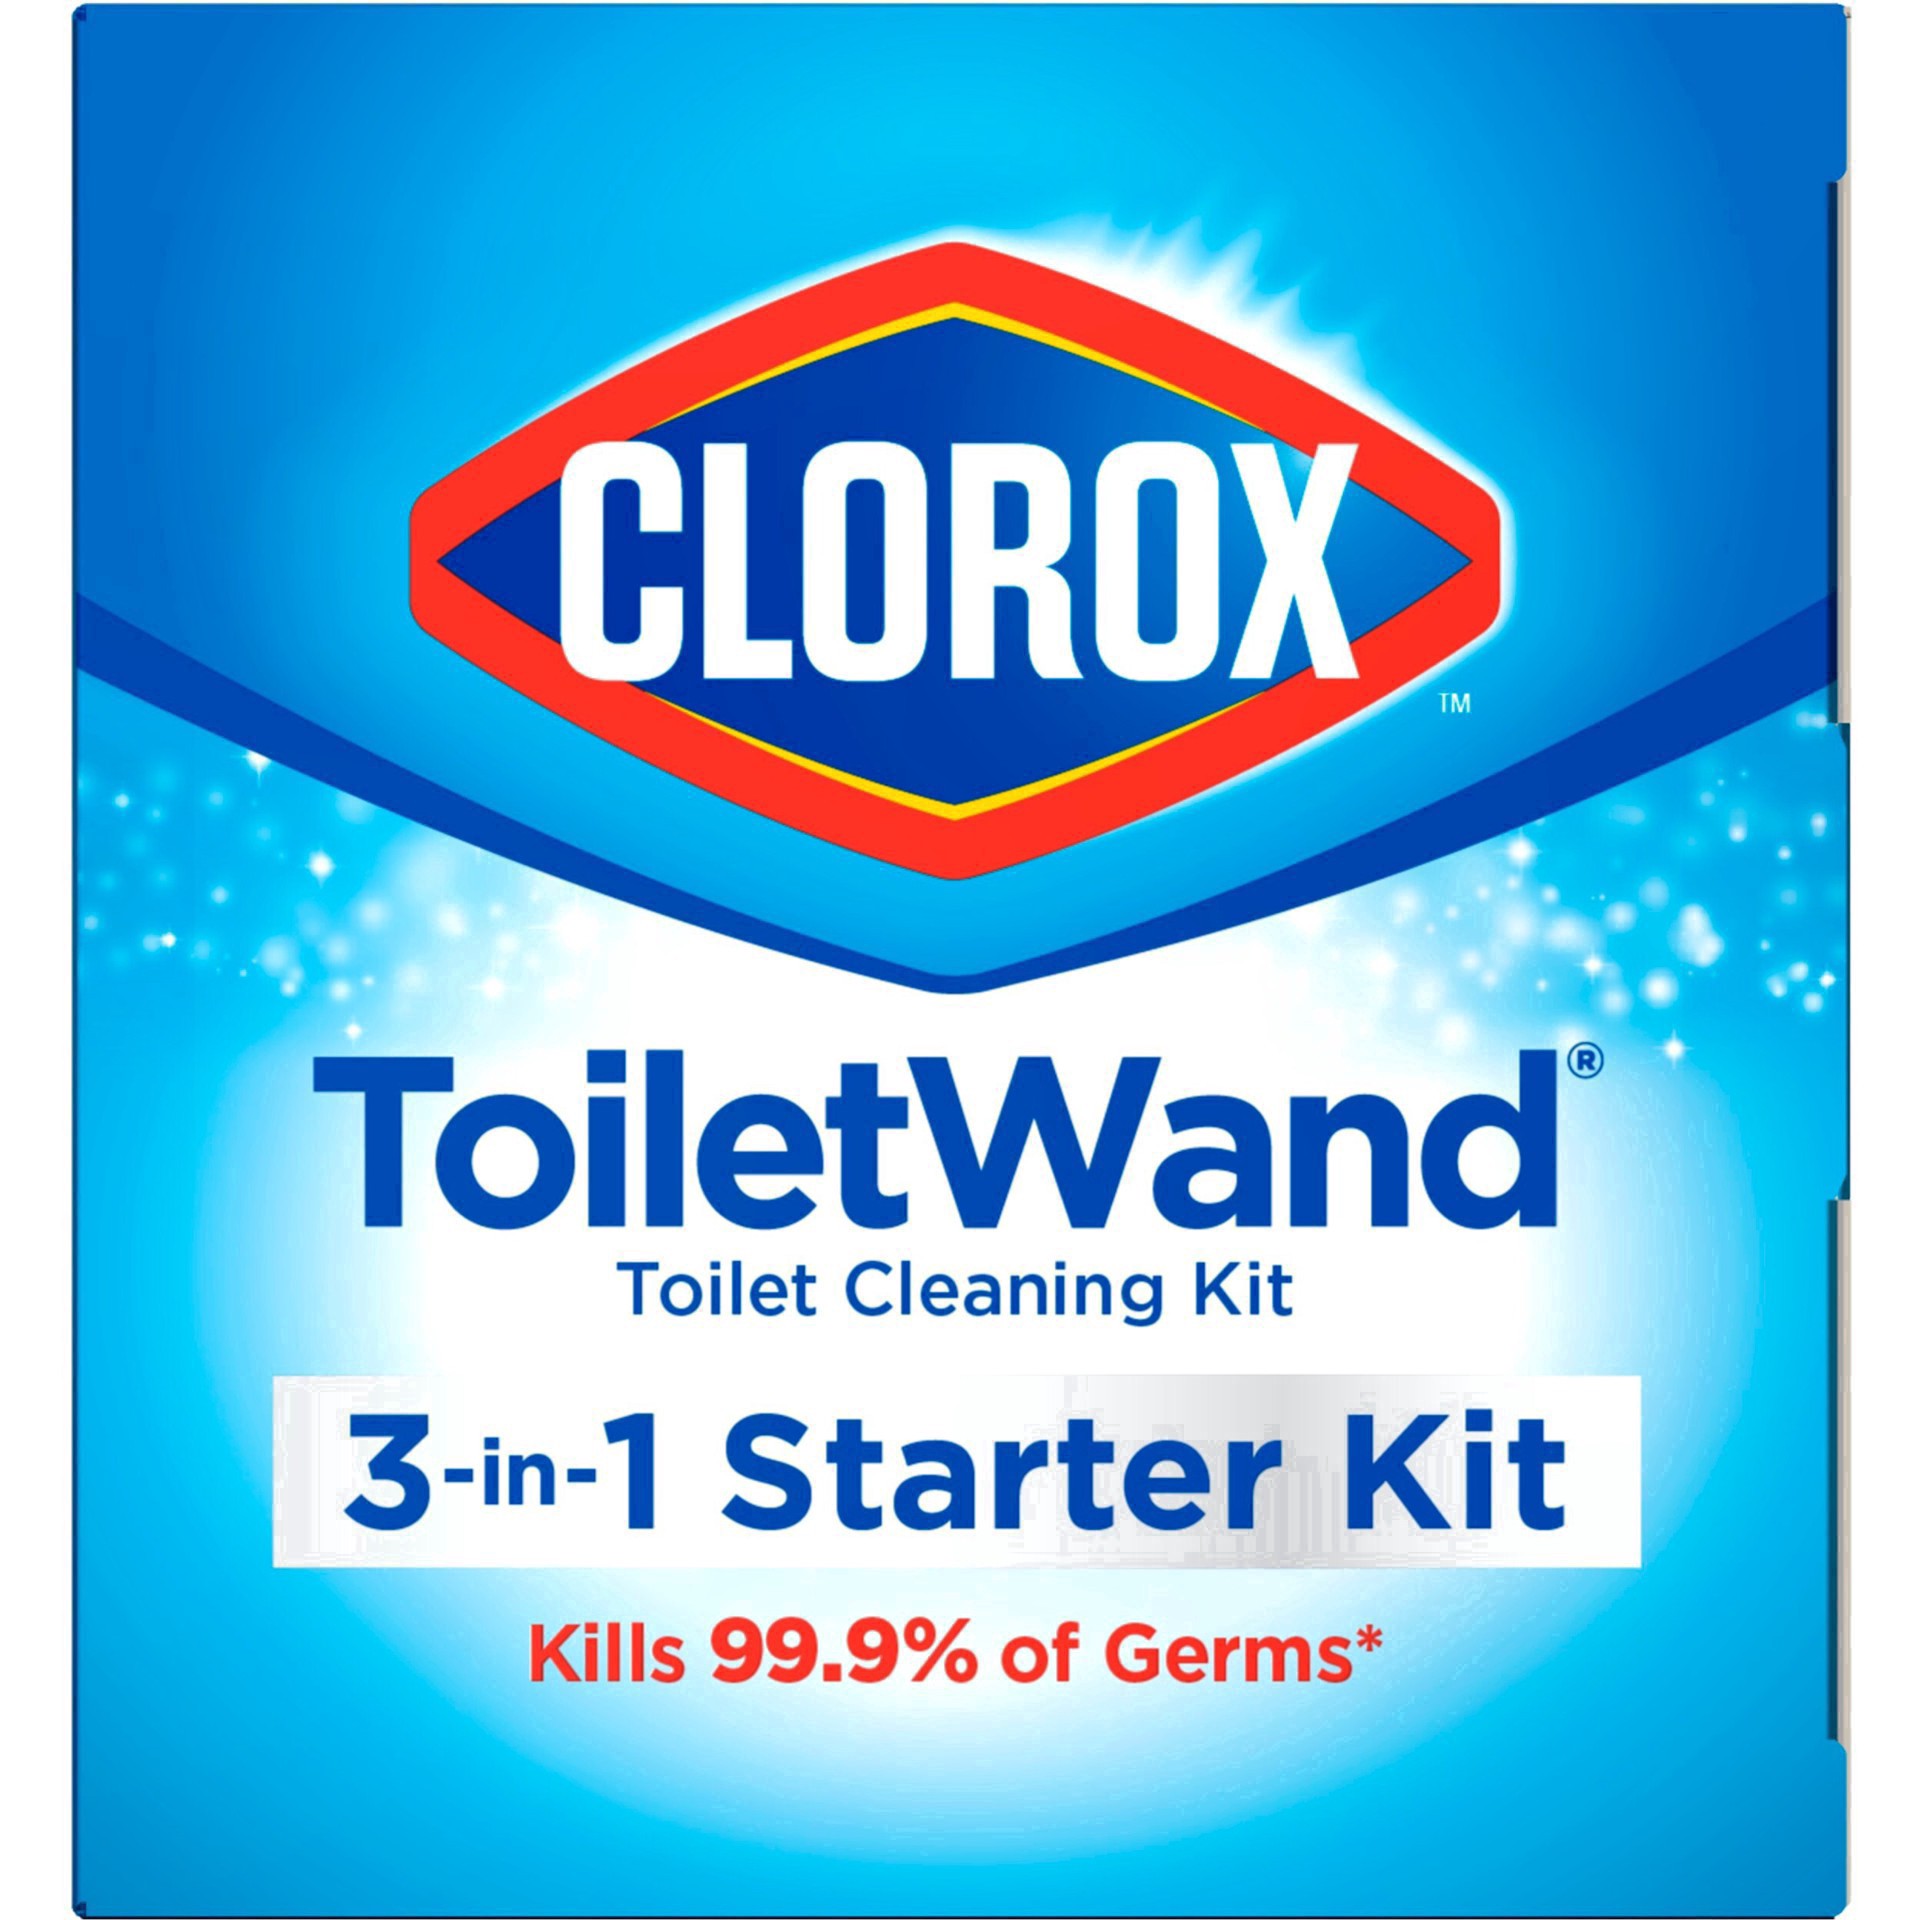 slide 22 of 176, Clorox Toilet Wand 3-in-1 Starter Toliet Cleaning Kit, 1 ct